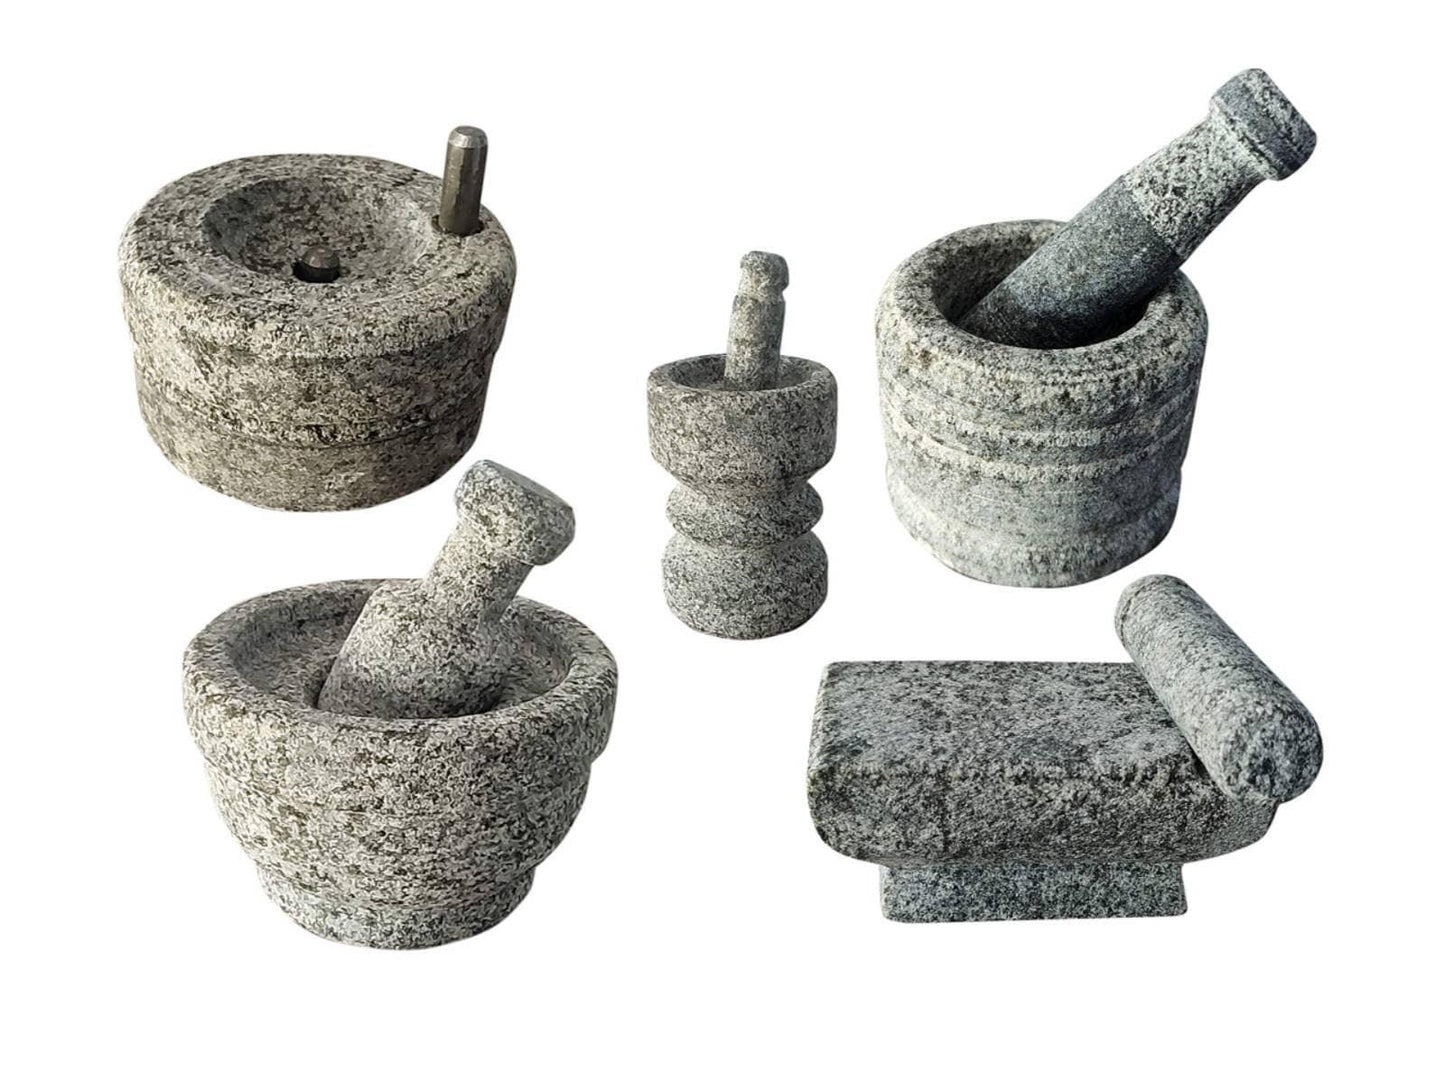 Real Cooking Miniature Set Miniature Mortar and Pestle Set Traditional Grinding Stone Kitchen Play Set Tiny Cooking Set Miniature Utensil